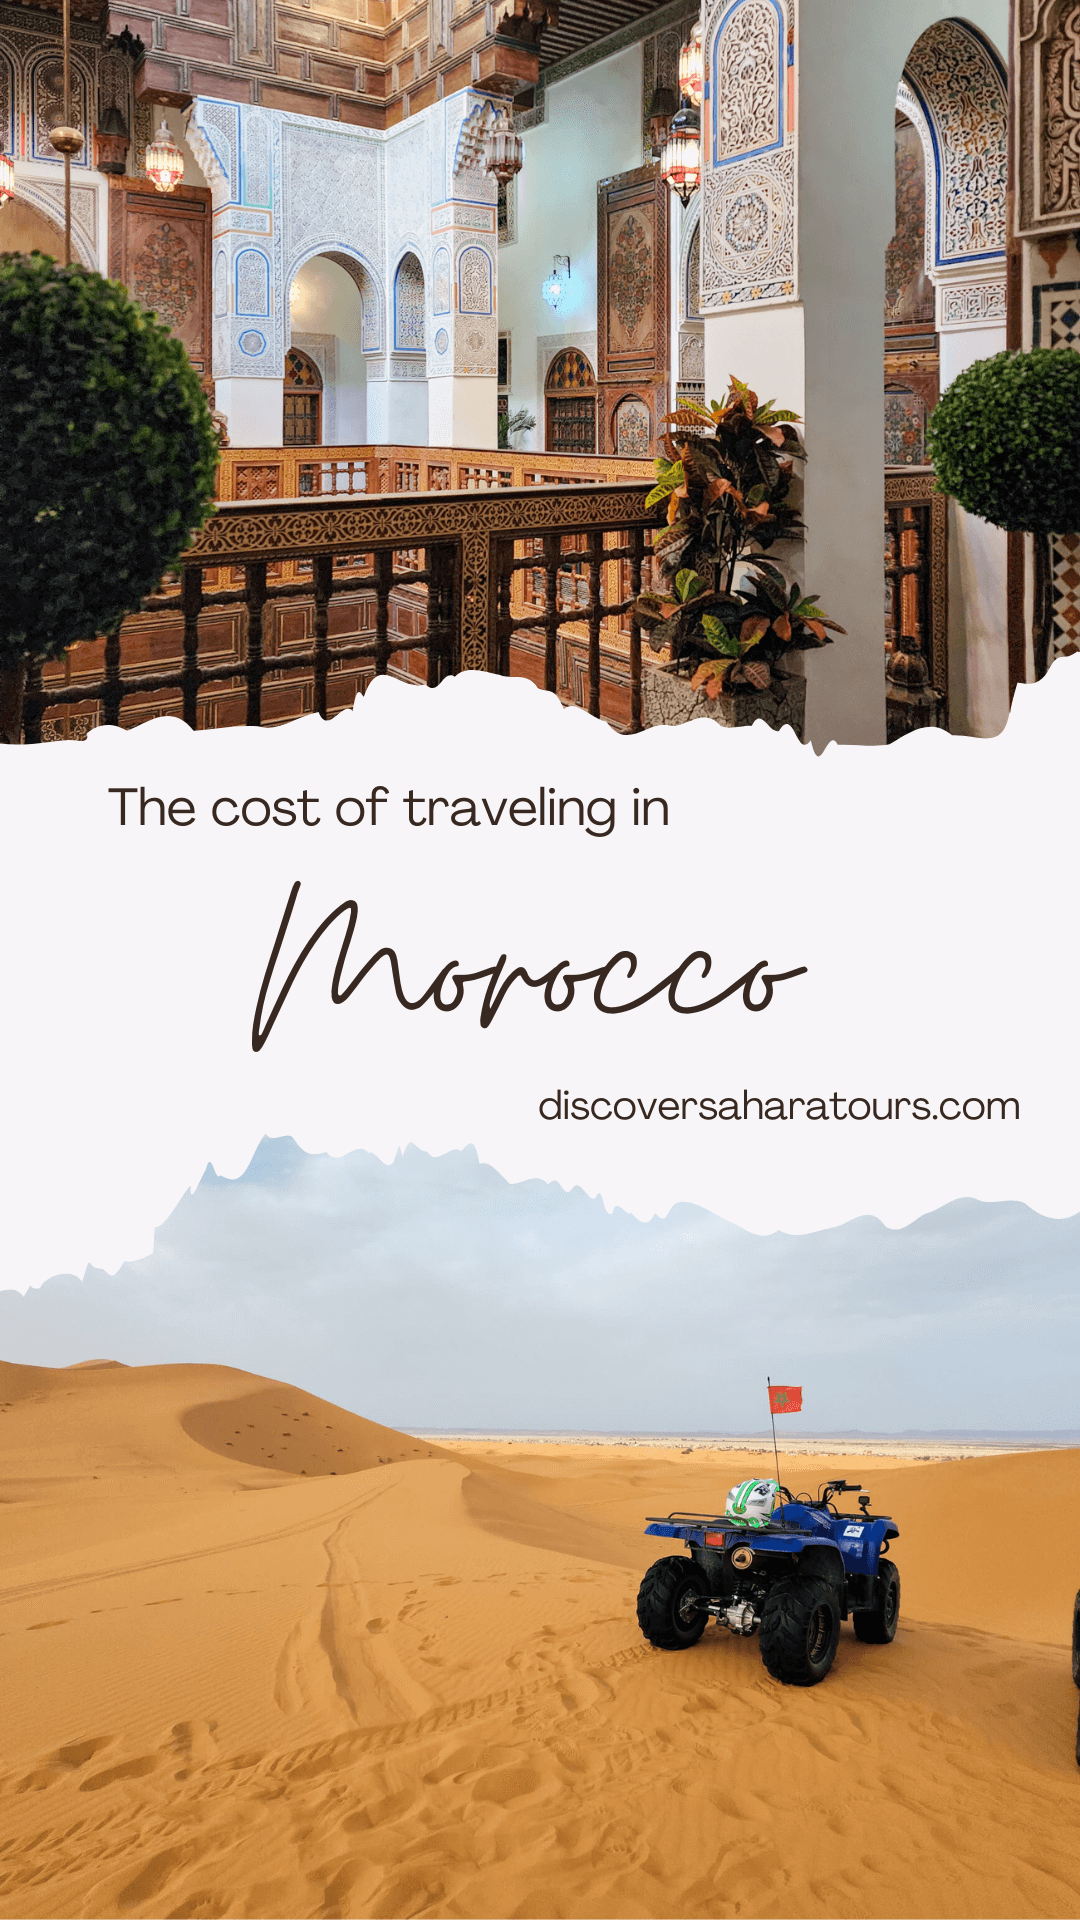 The cost of traveling in Morocco